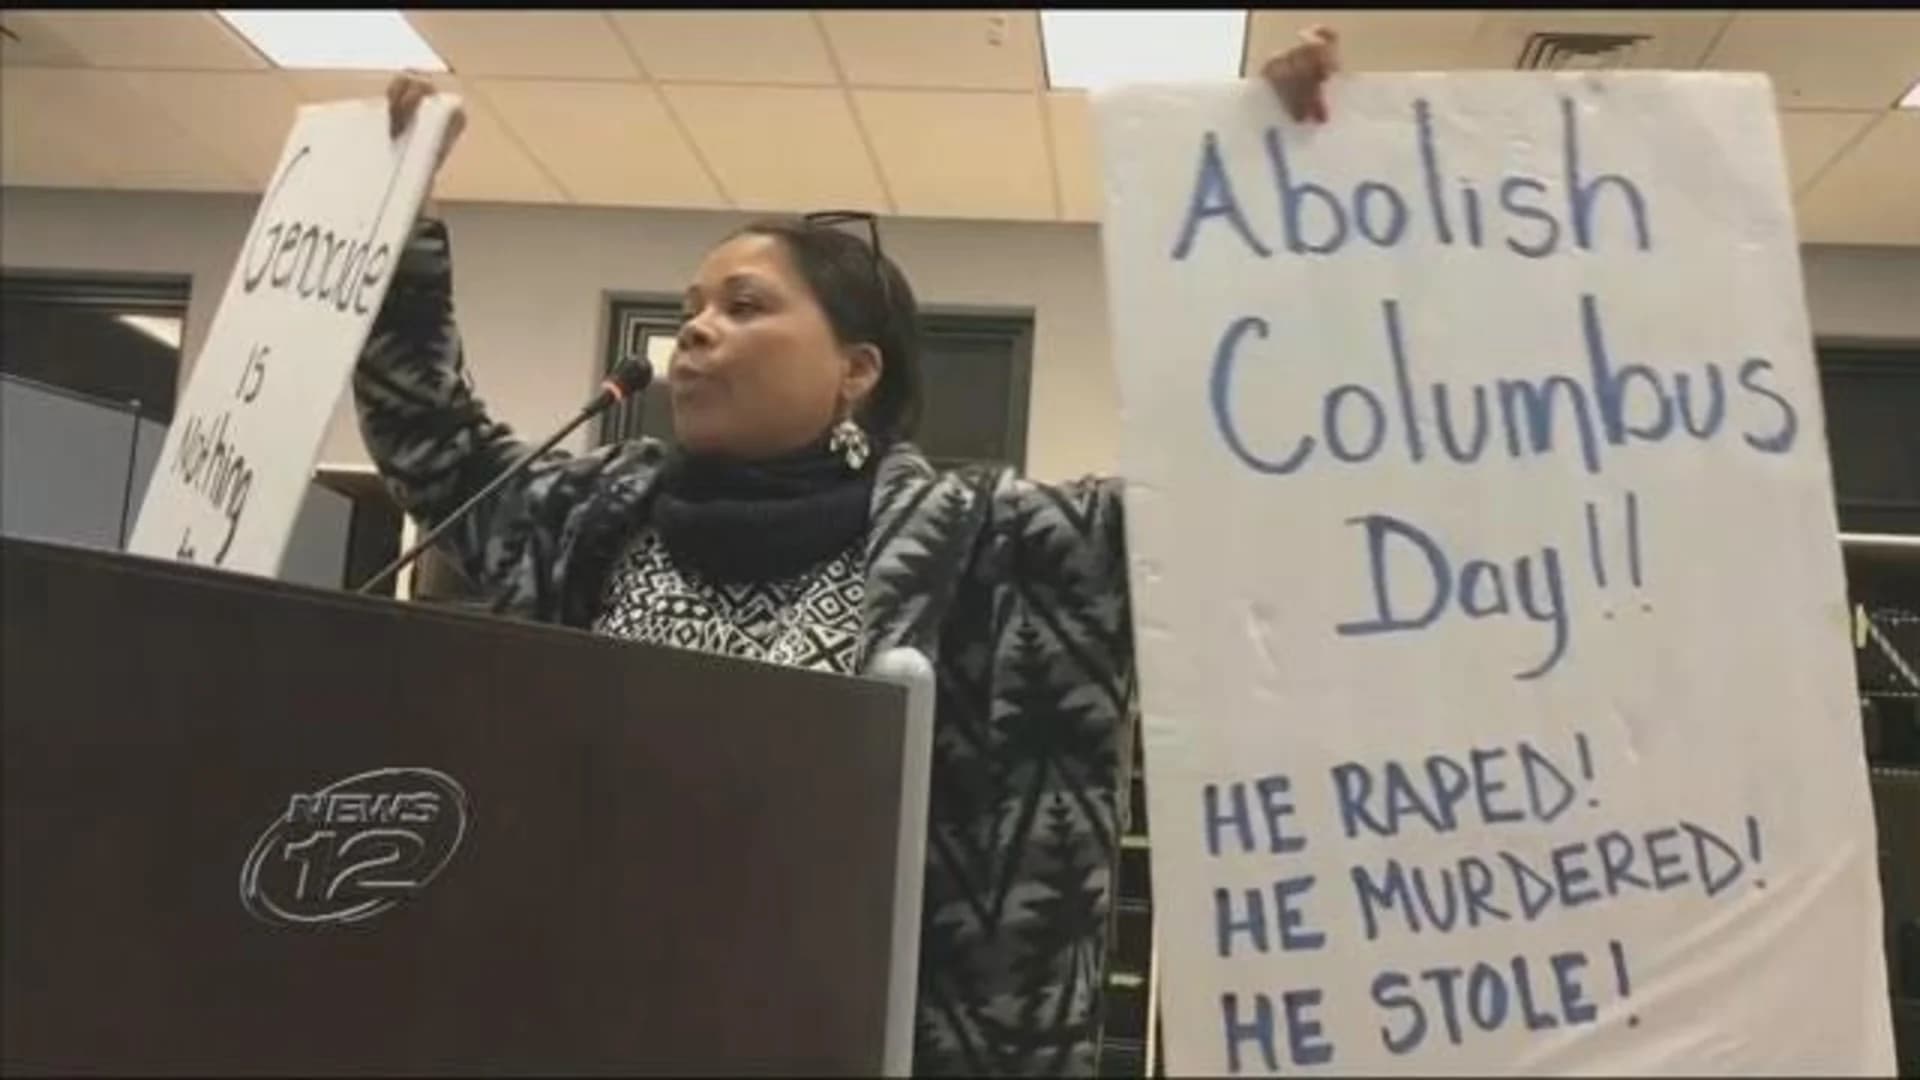 Columbus Day-Indigenous Peoples Day controversy erupts again in Southampton